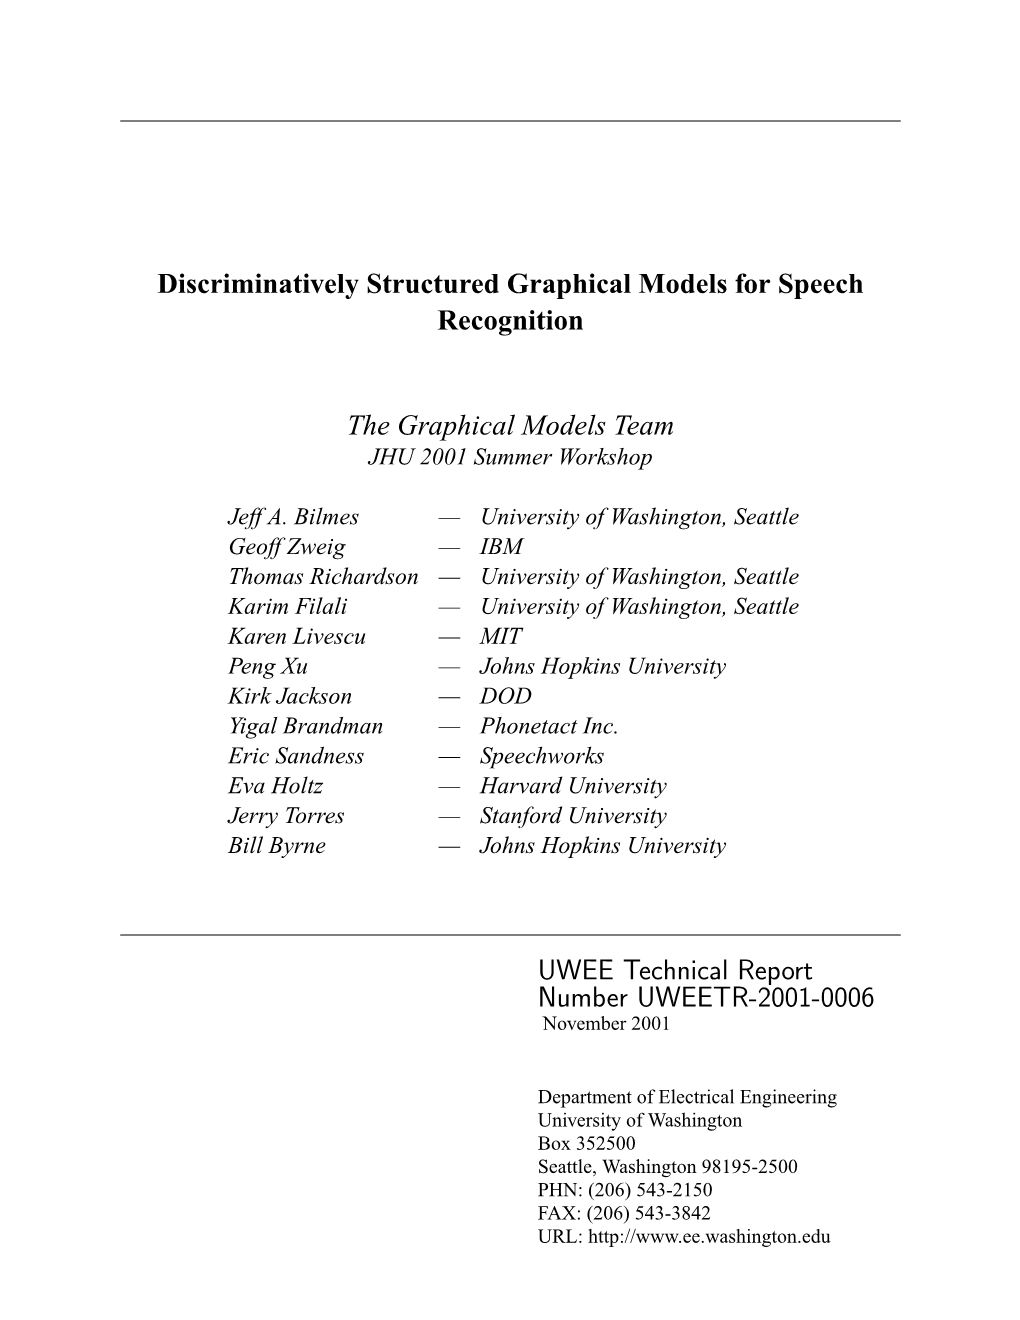 Discriminatively Structured Graphical Models for Speech Recognition The